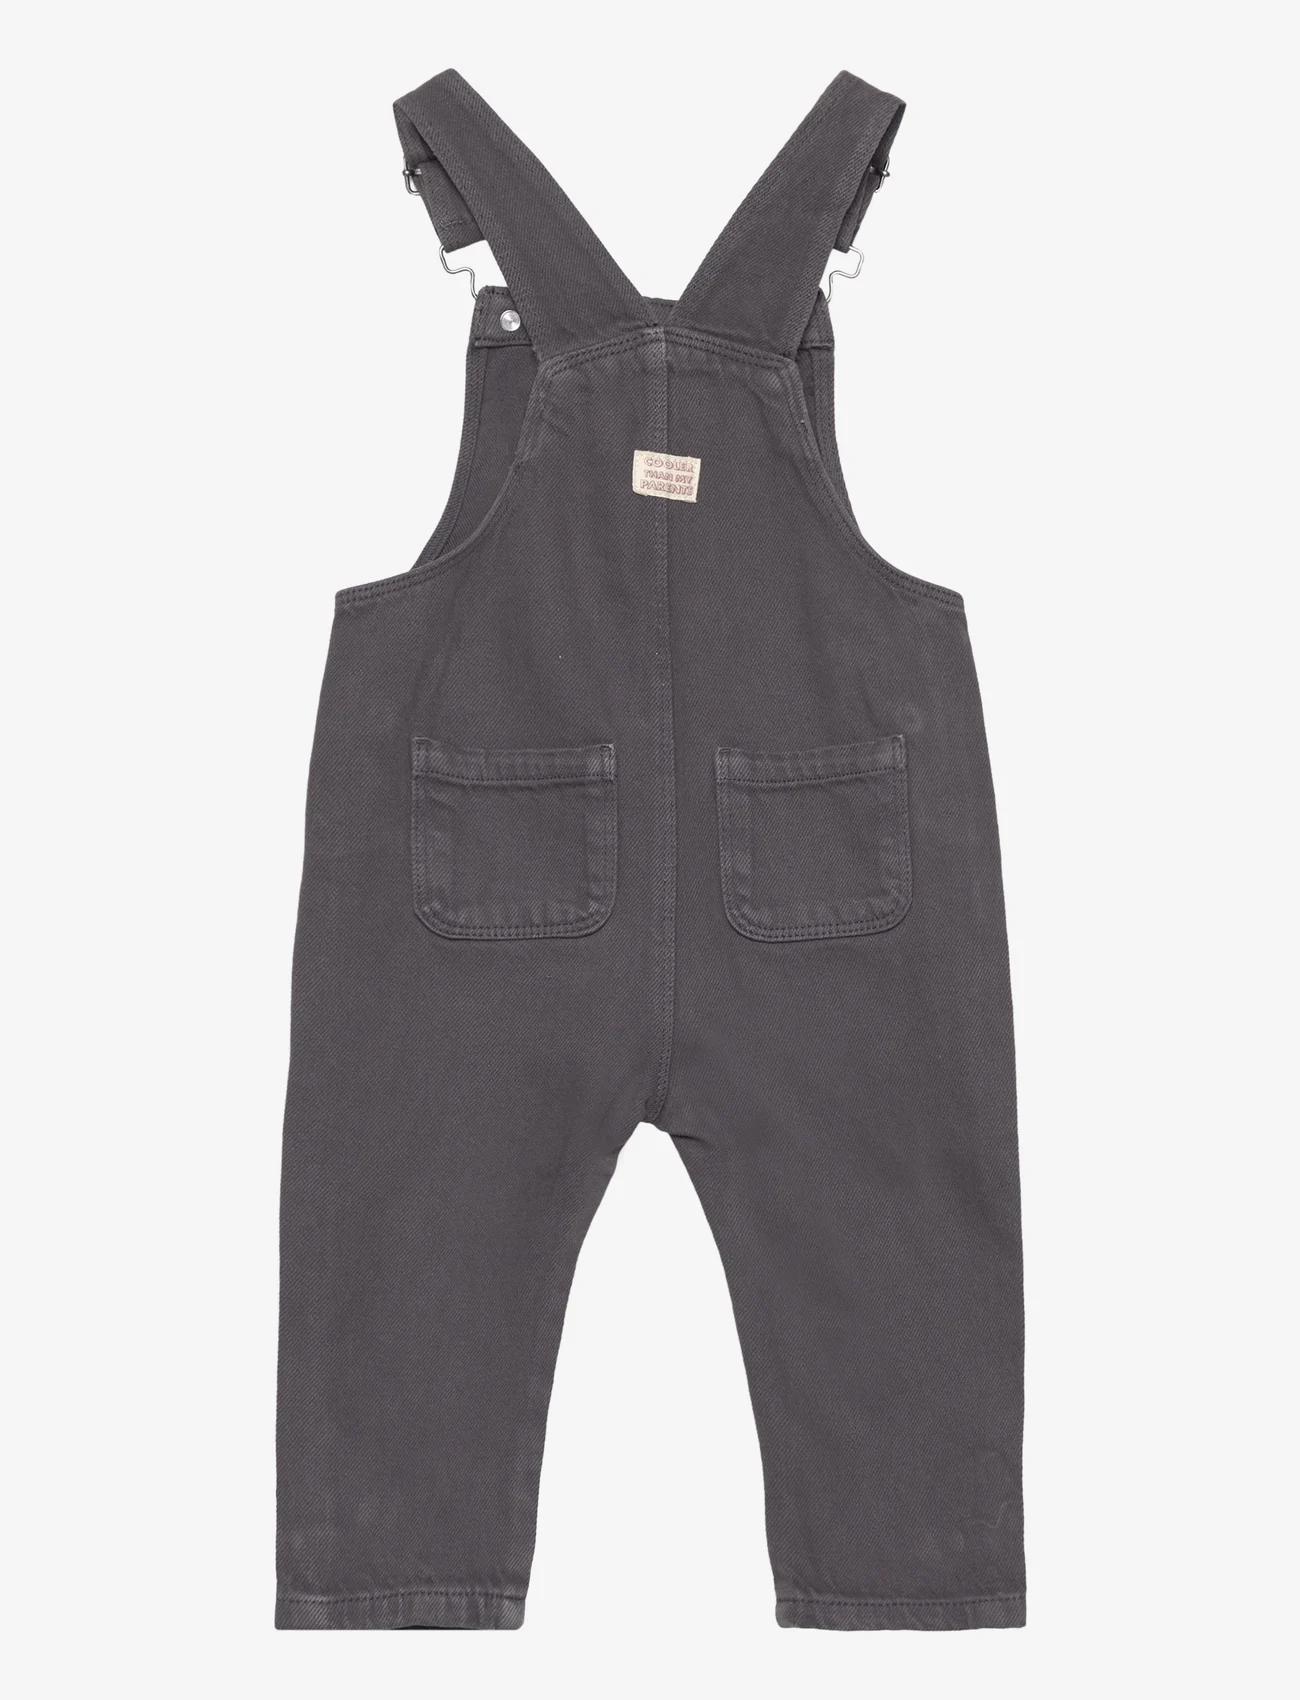 Mango - Cotton dungarees - sommarfynd - charcoal - 1